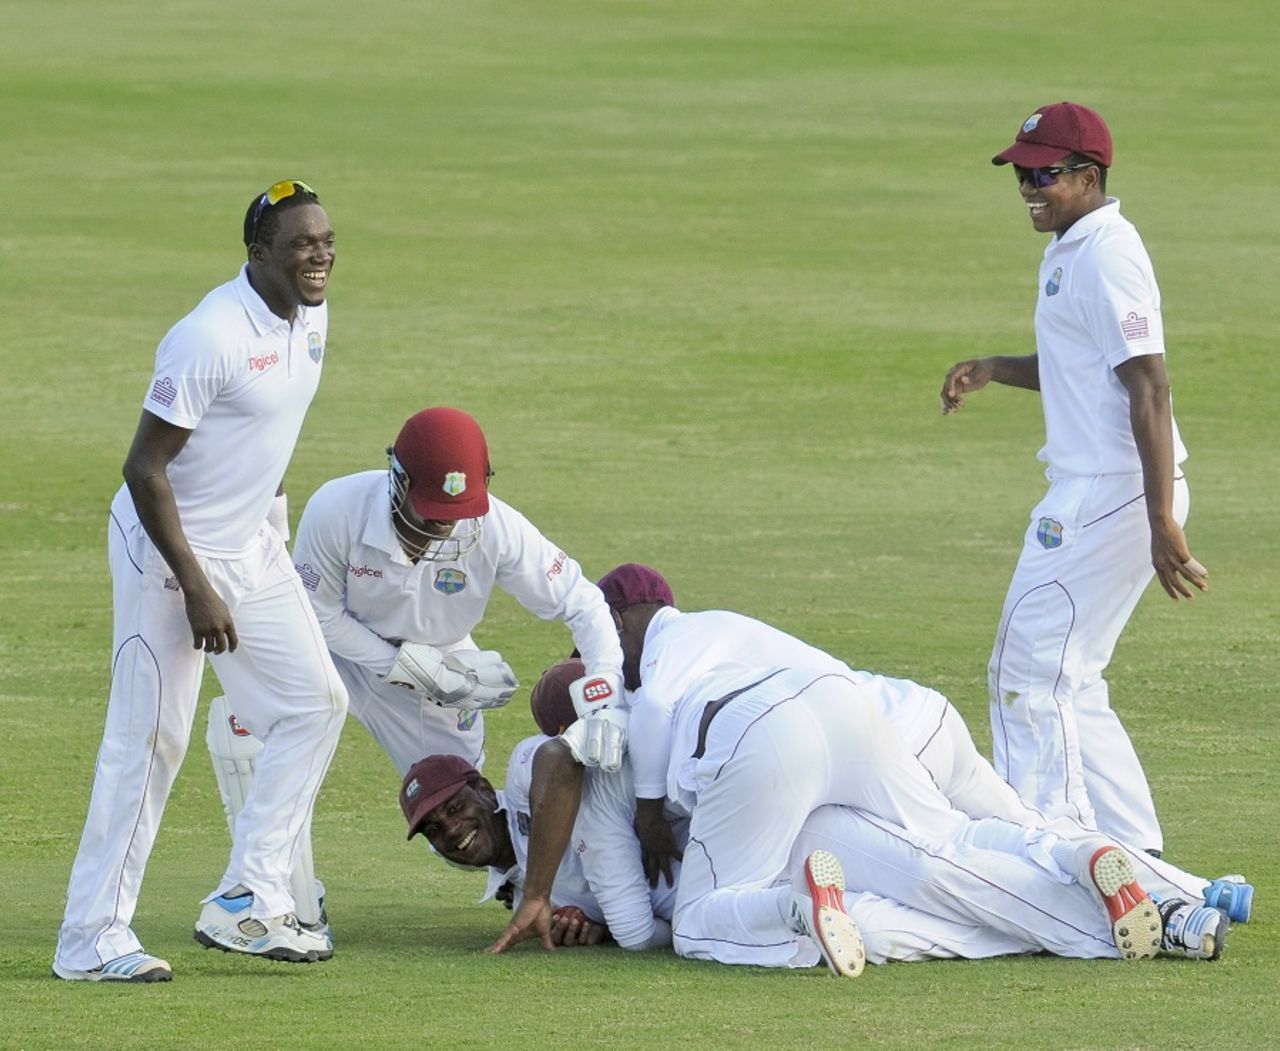 Shannon Gabriel's team-mates pile up on top of him after he took a catch, West Indies v Bangladesh, 2nd Test, St. Lucia, 4th day, September 16, 2014